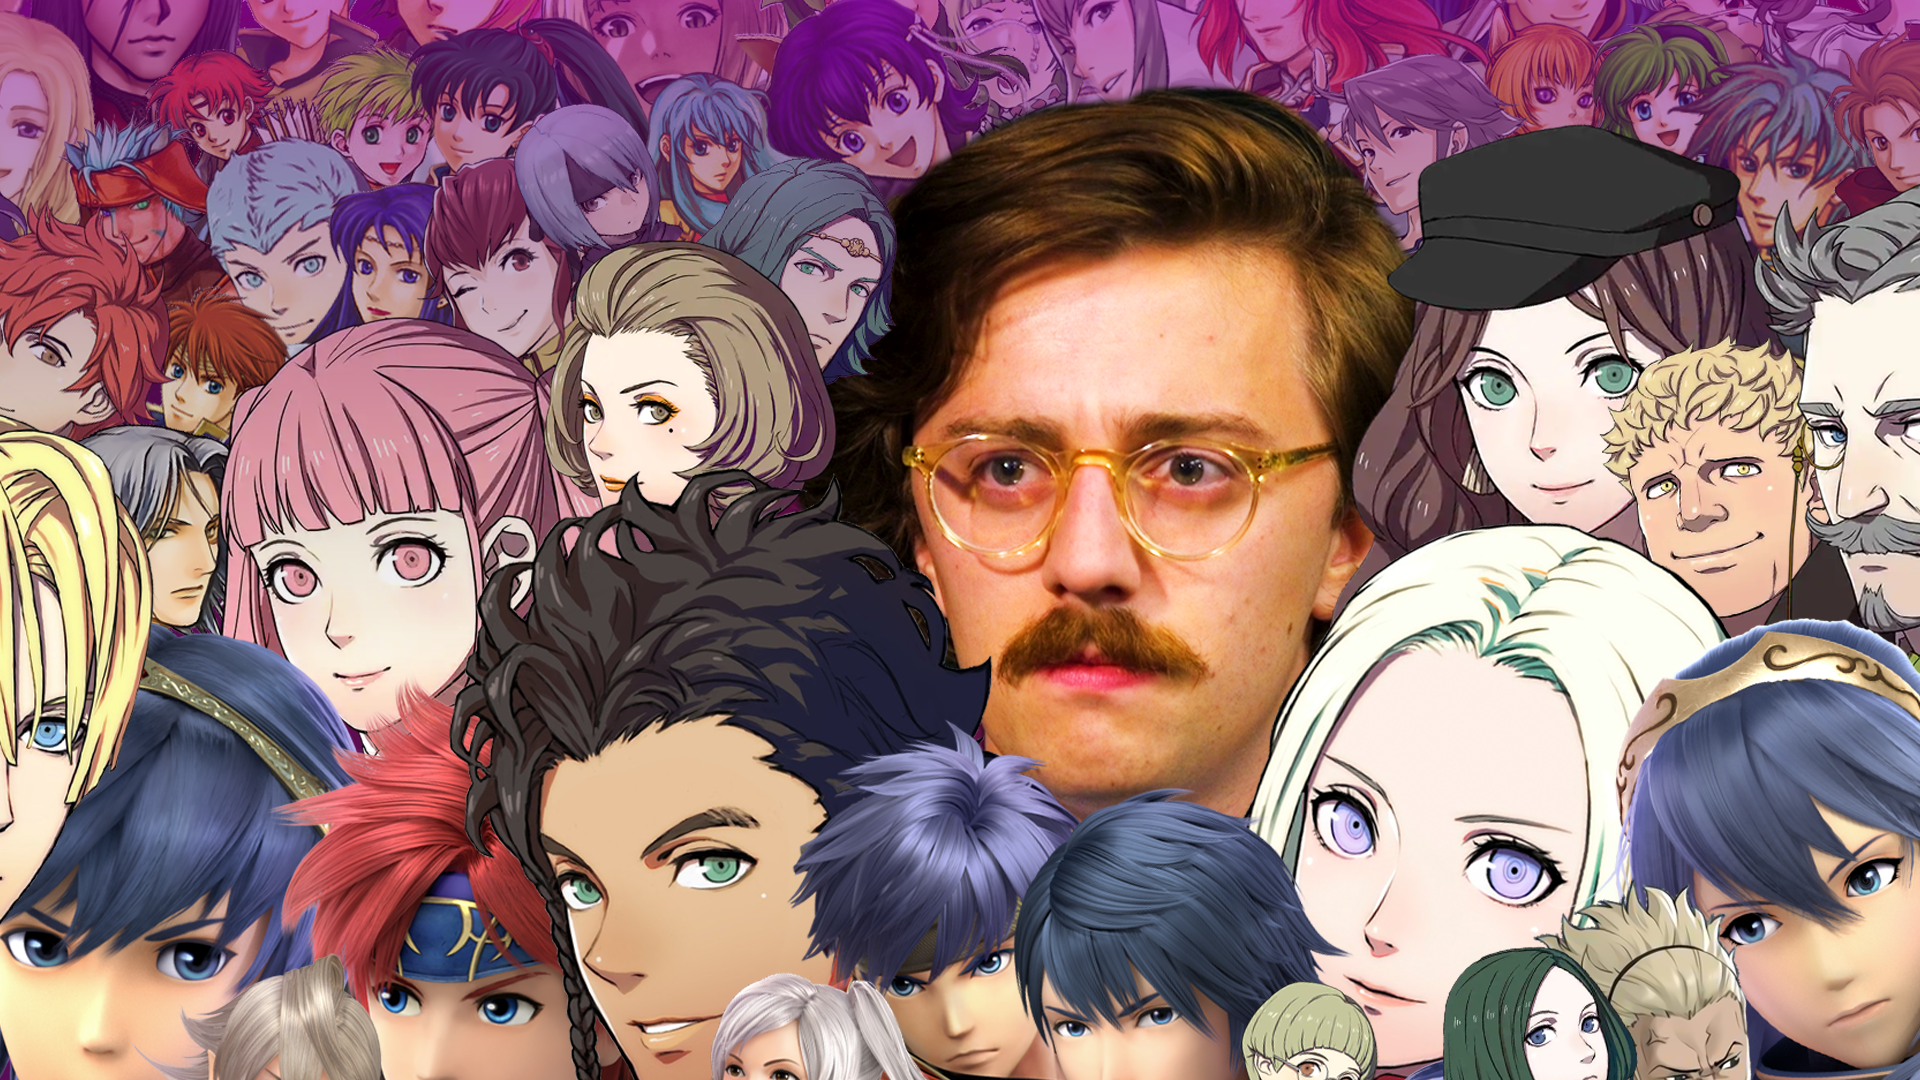 Brian David Gilbert’s face is tucked in among the faces of hundreds of Fire Emblem characters